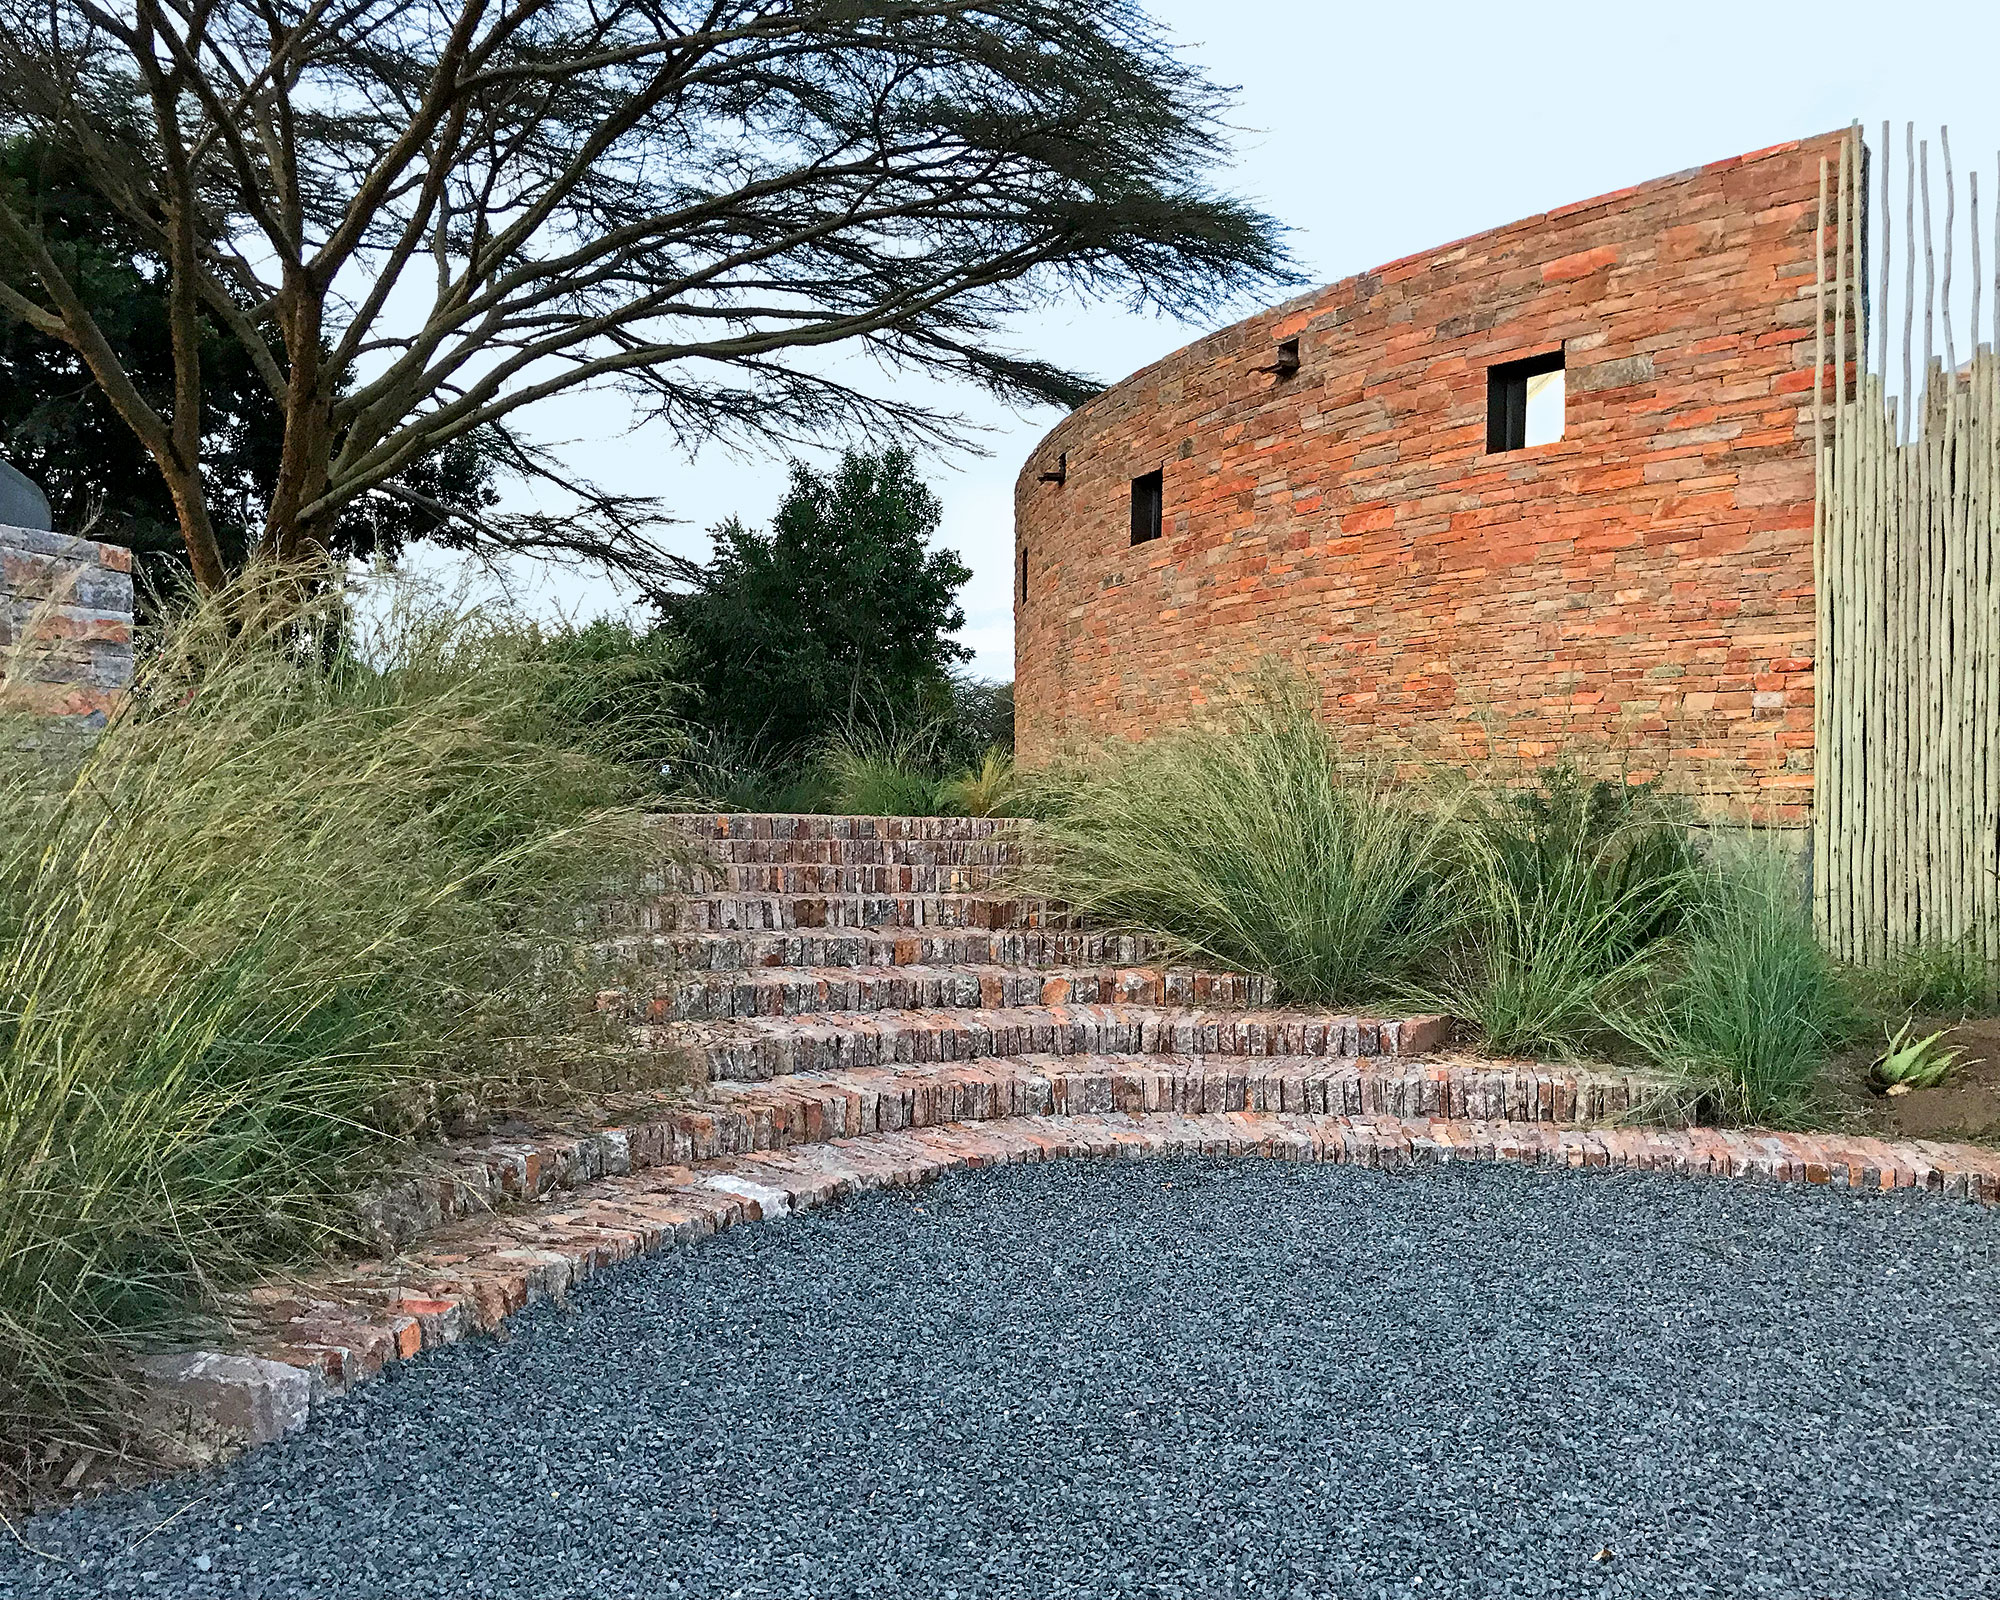 Brick steps and gray gravel, grass plants, curvaceous red brick wall